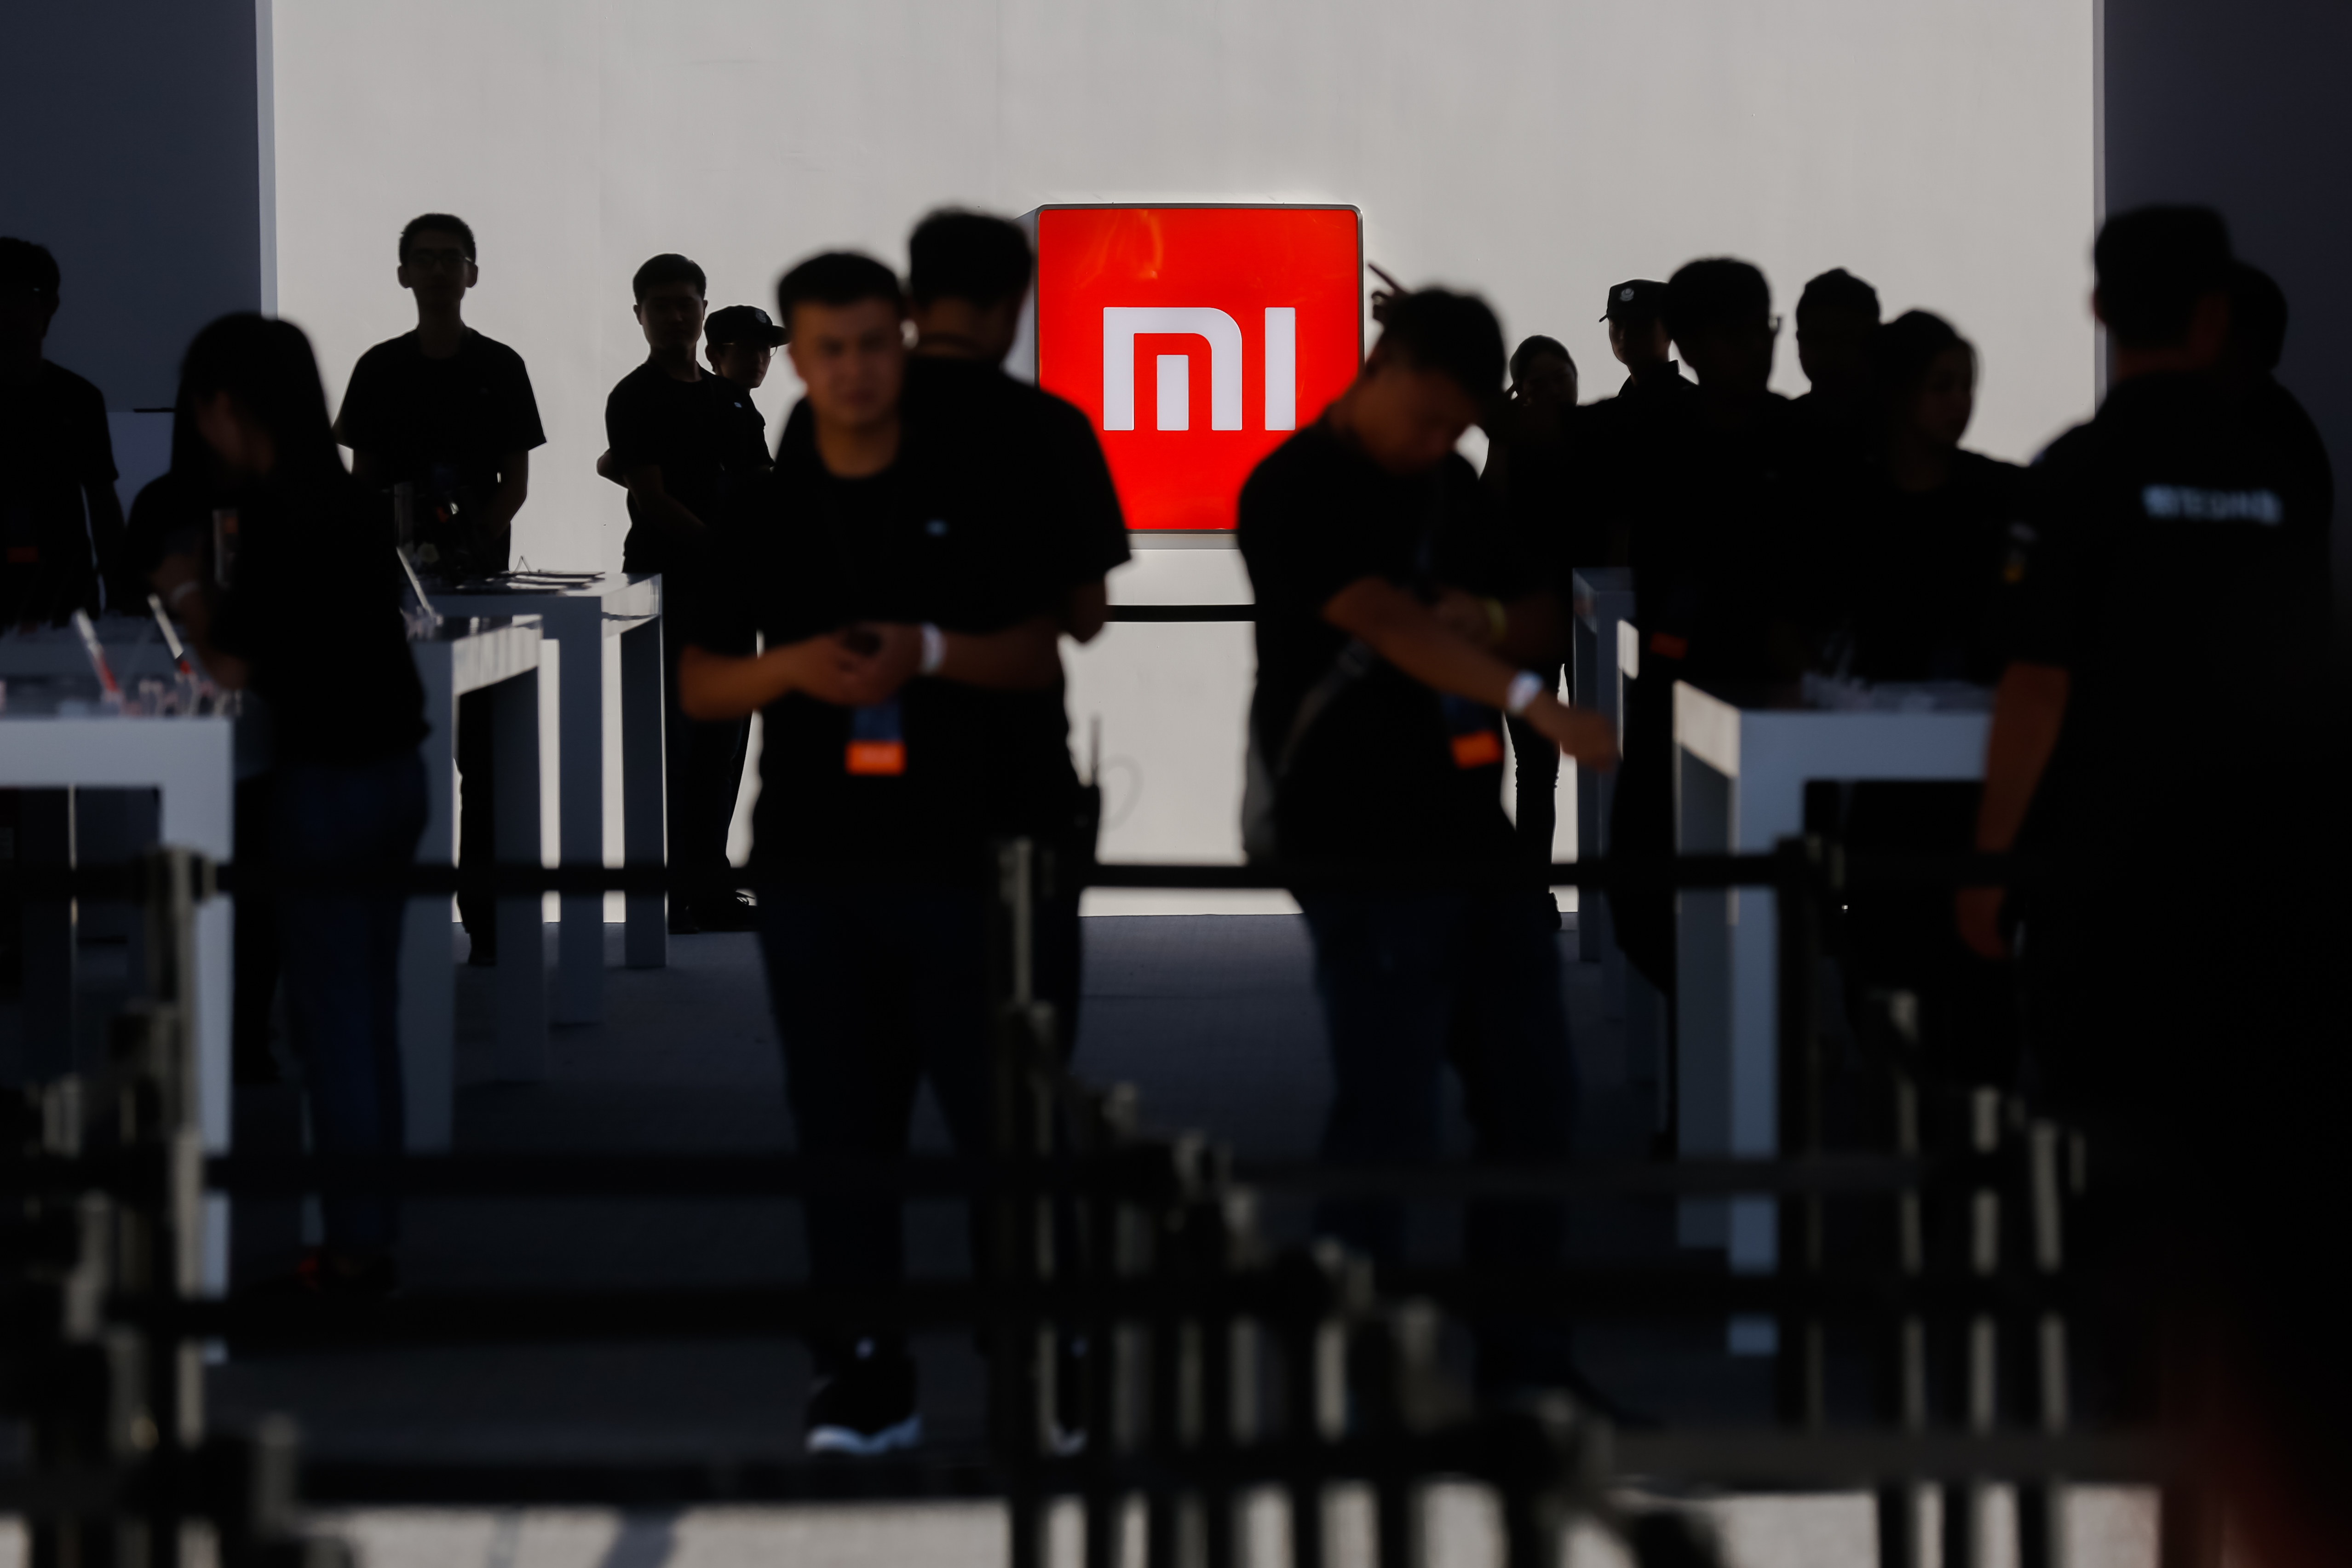 Xiaomis Q3 earnings report shows slowing growth